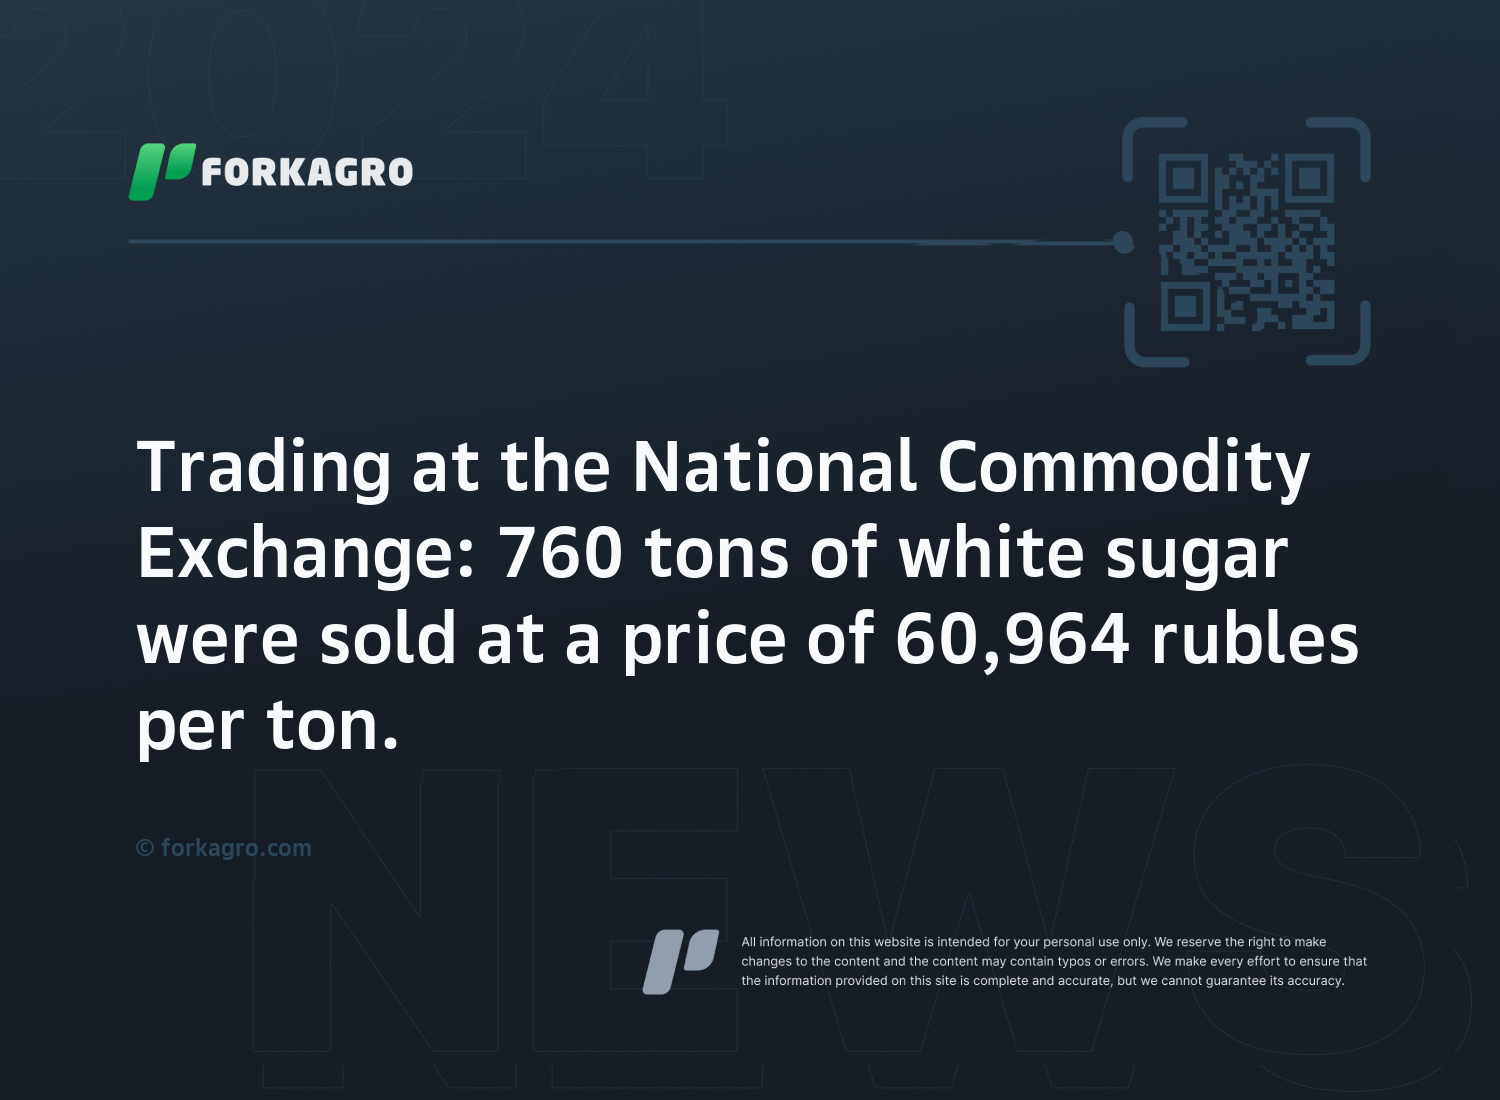 Trading at the National Commodity Exchange: 760 tons of white sugar were sold at a price of 60,964 rubles per ton.